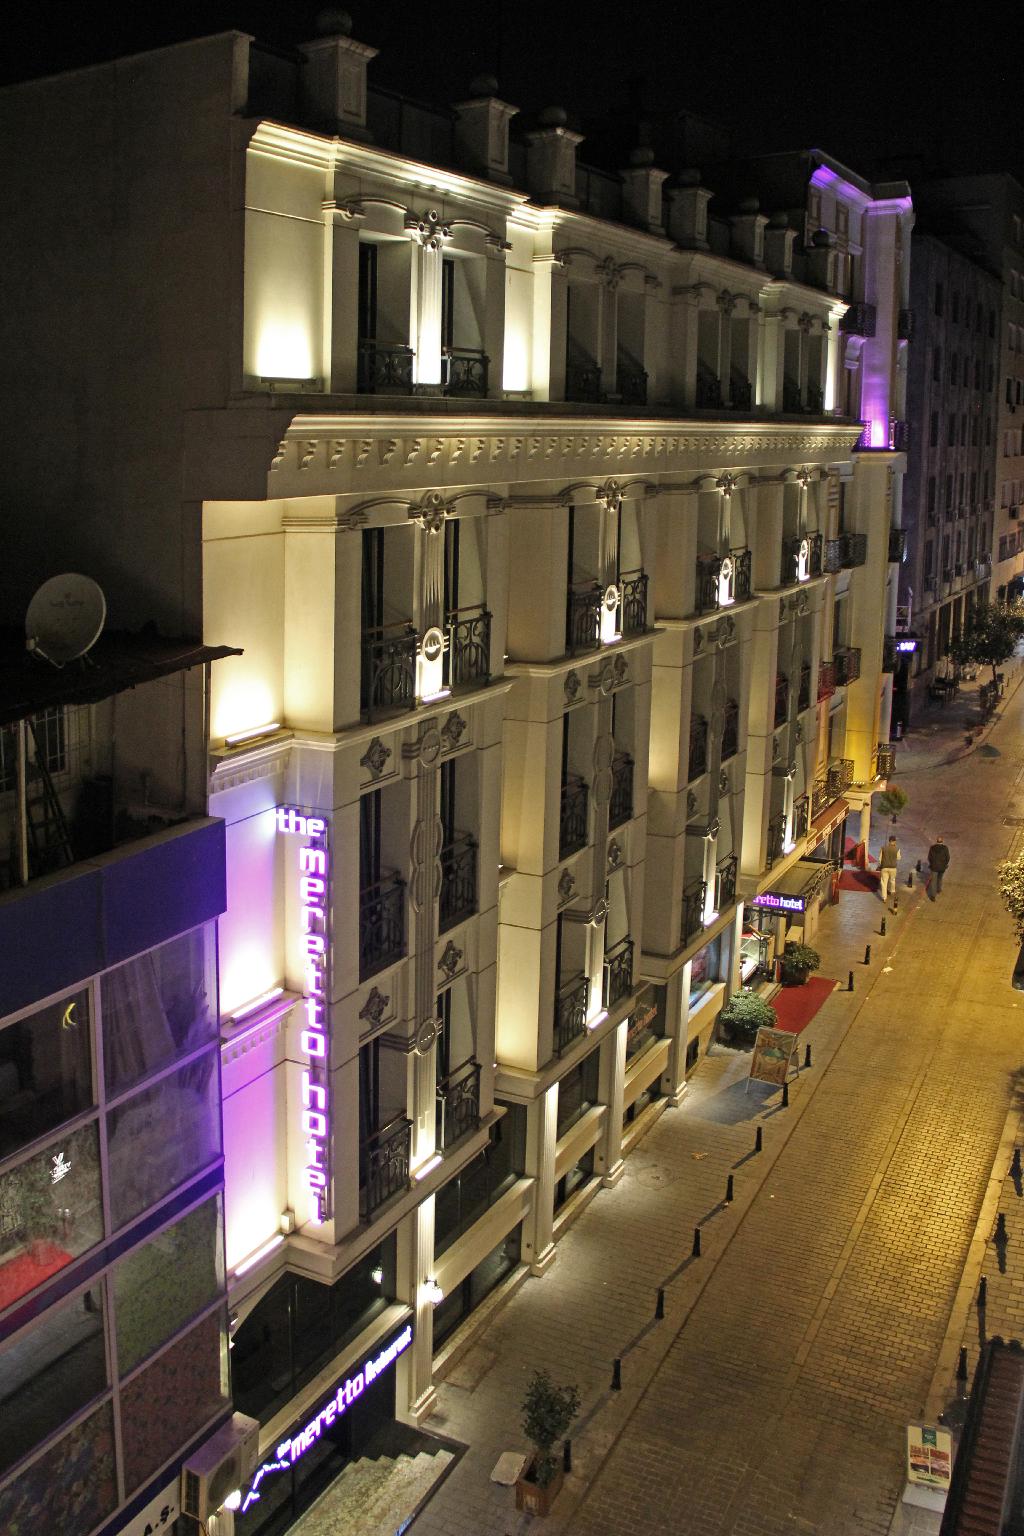 The Meretto Hotel İstanbul Old City